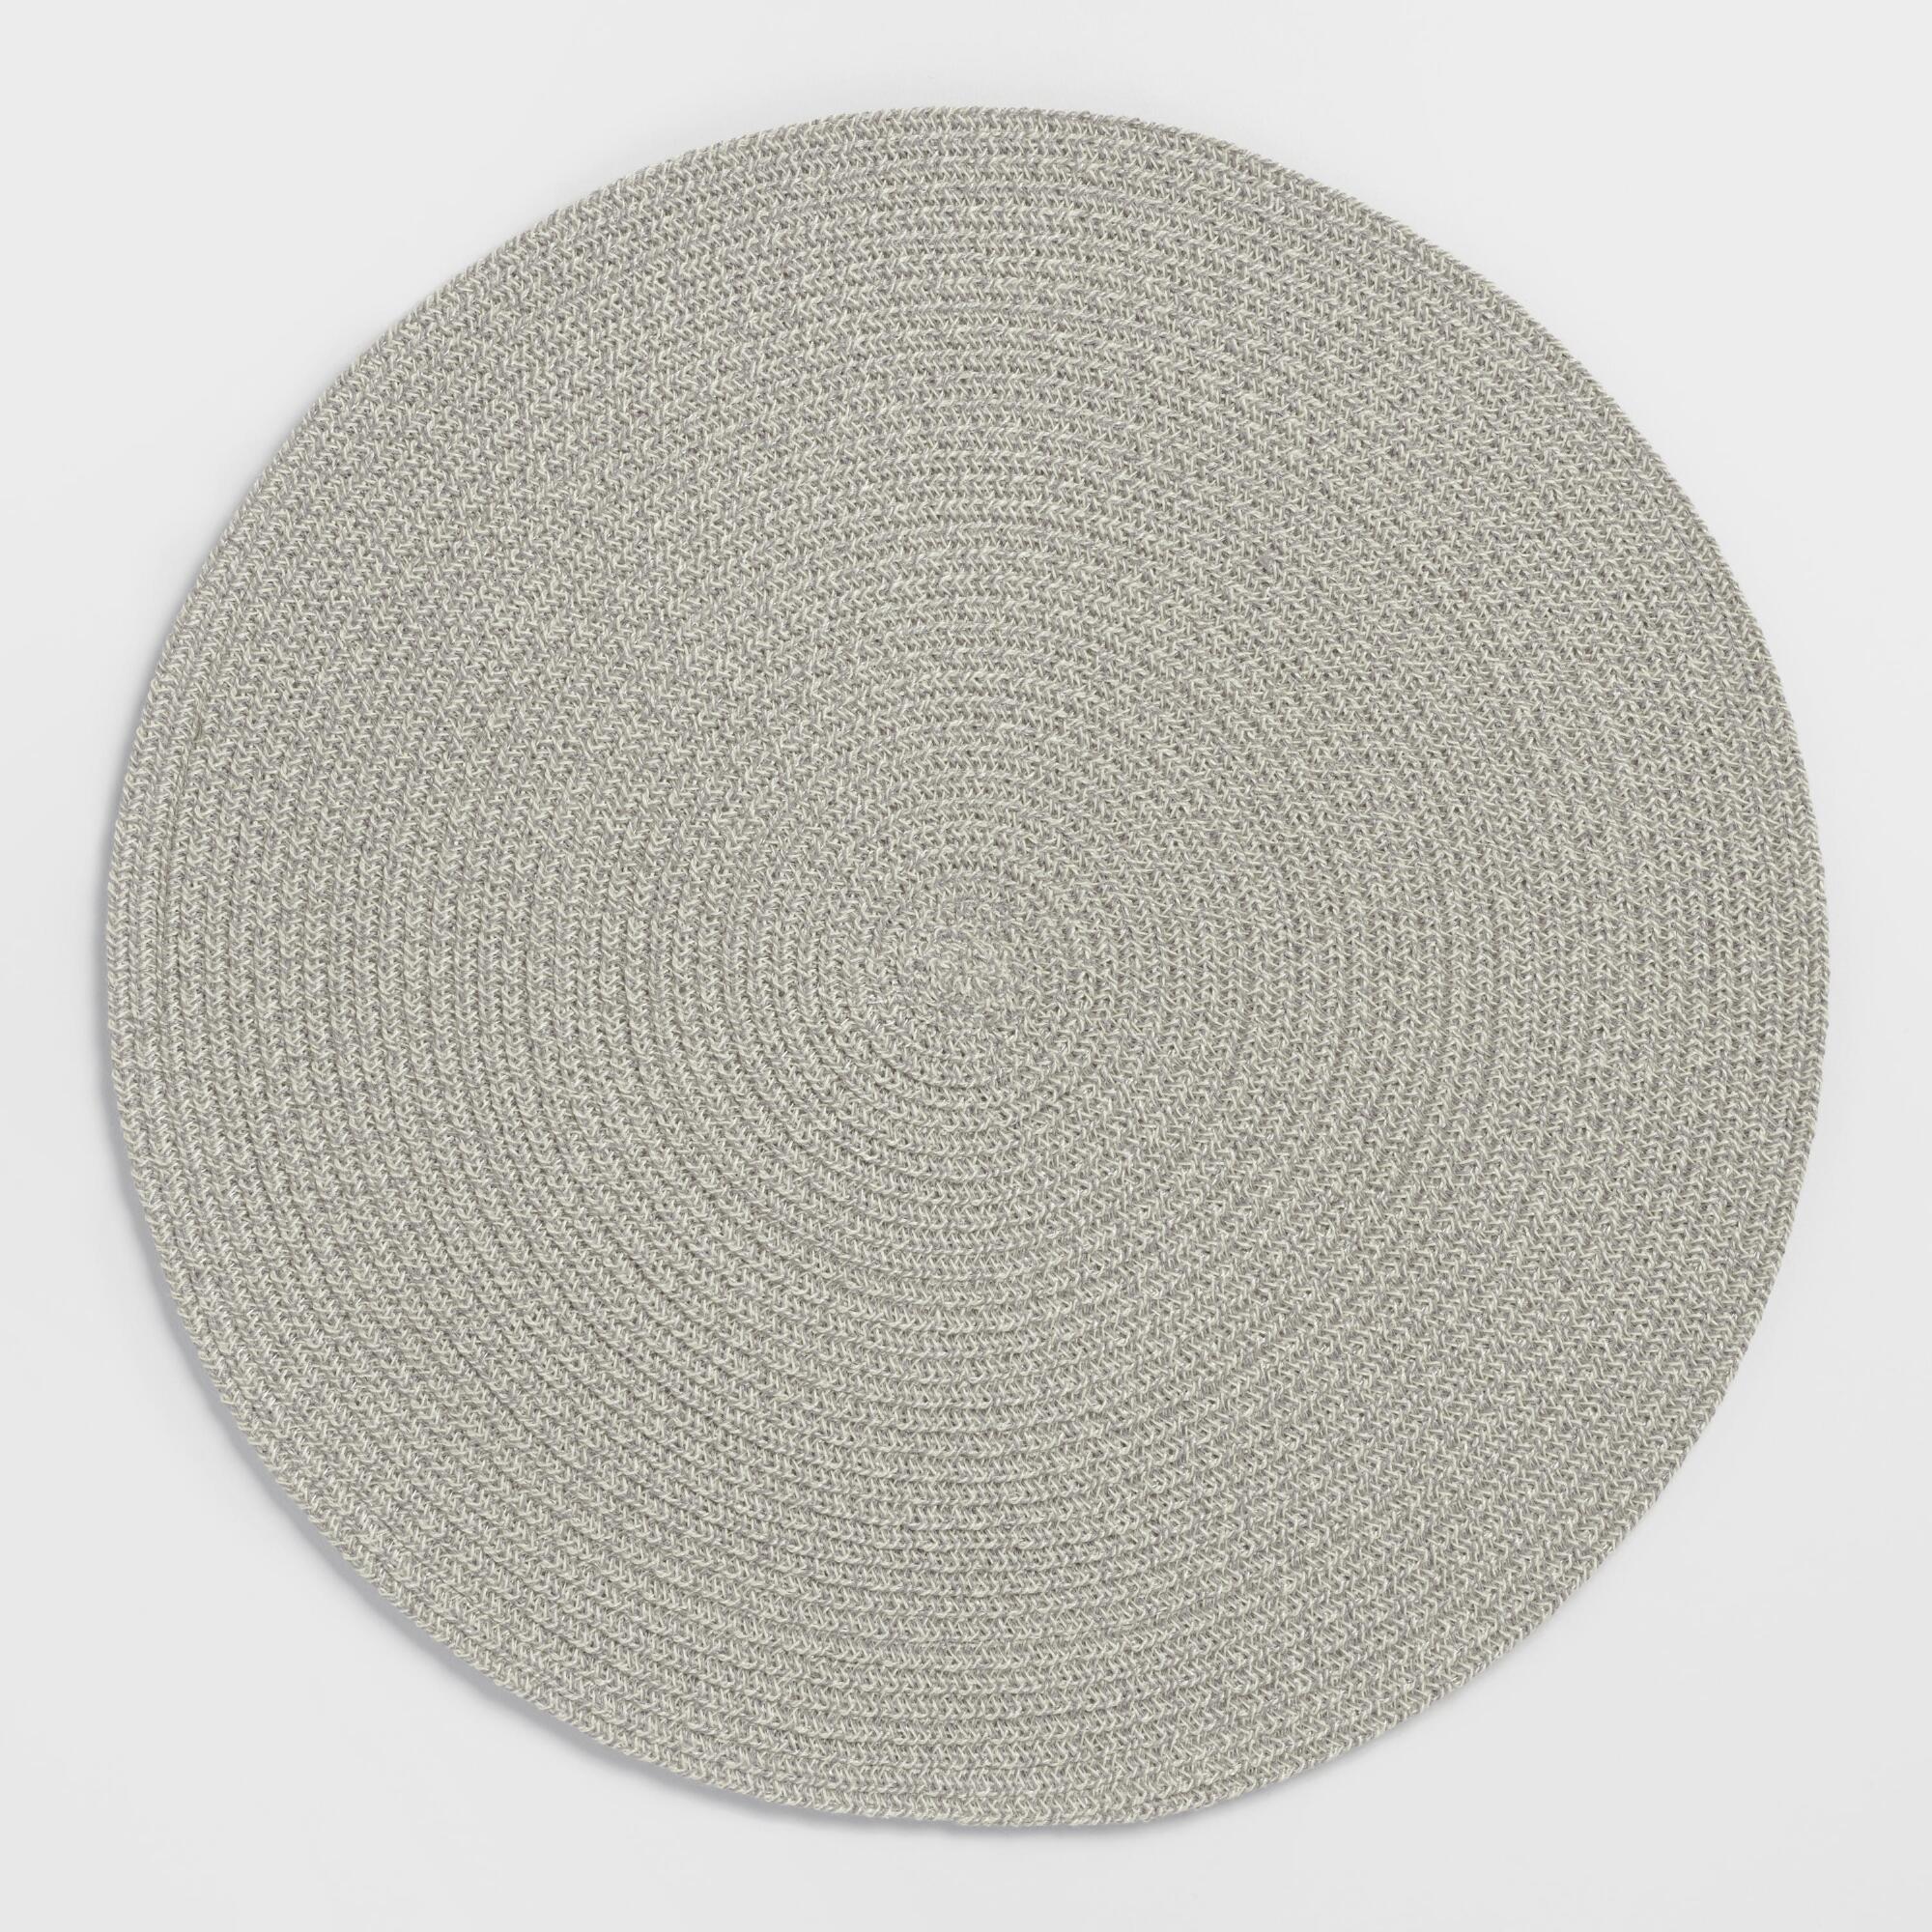 Round Gray Braided Placemats Set of 4 - Cotton by World Market